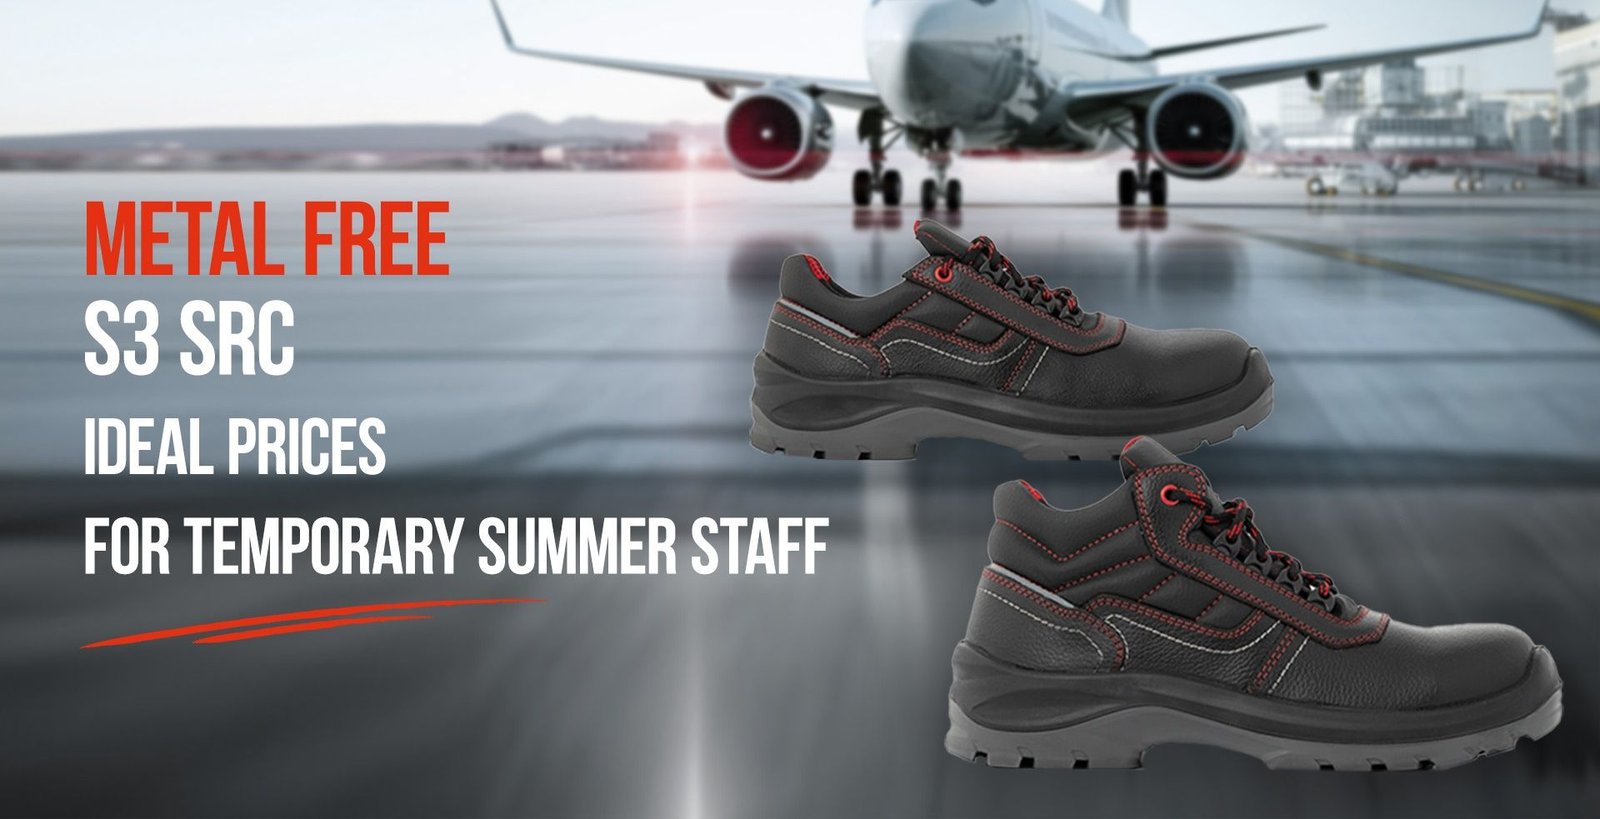 Metal free safety shoes with airport background